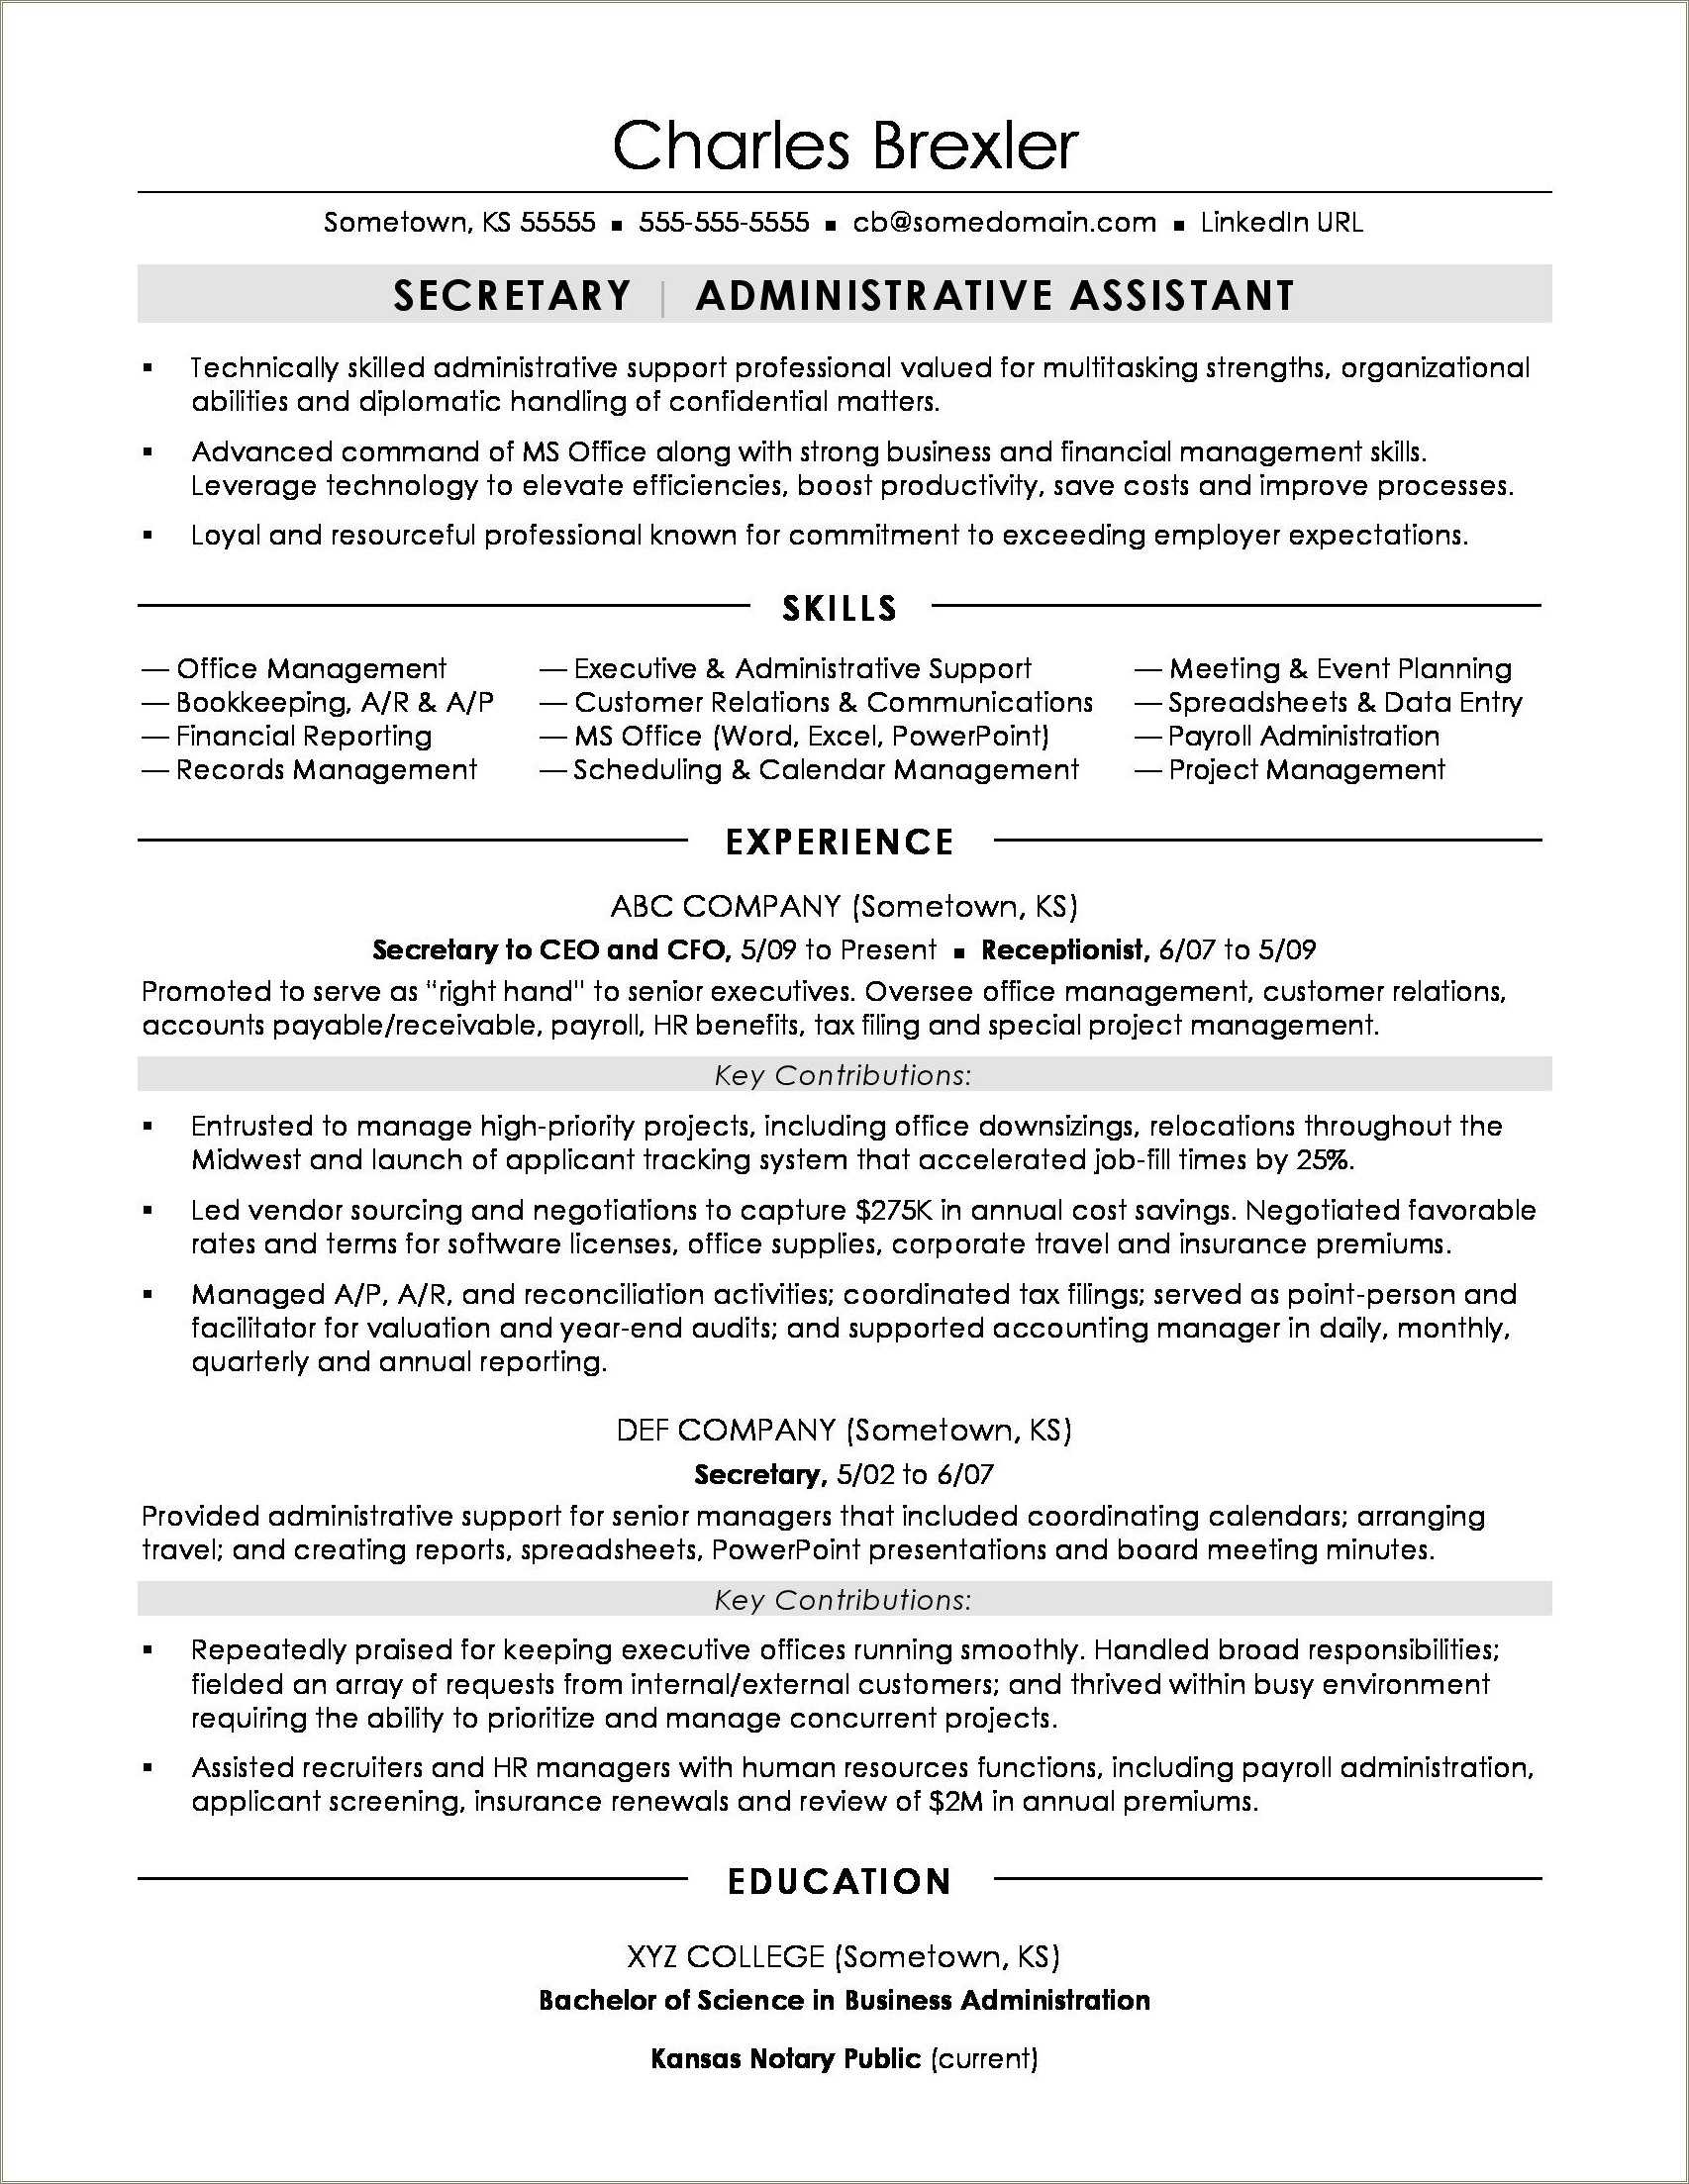 Description For Writing Schedules On A Resume